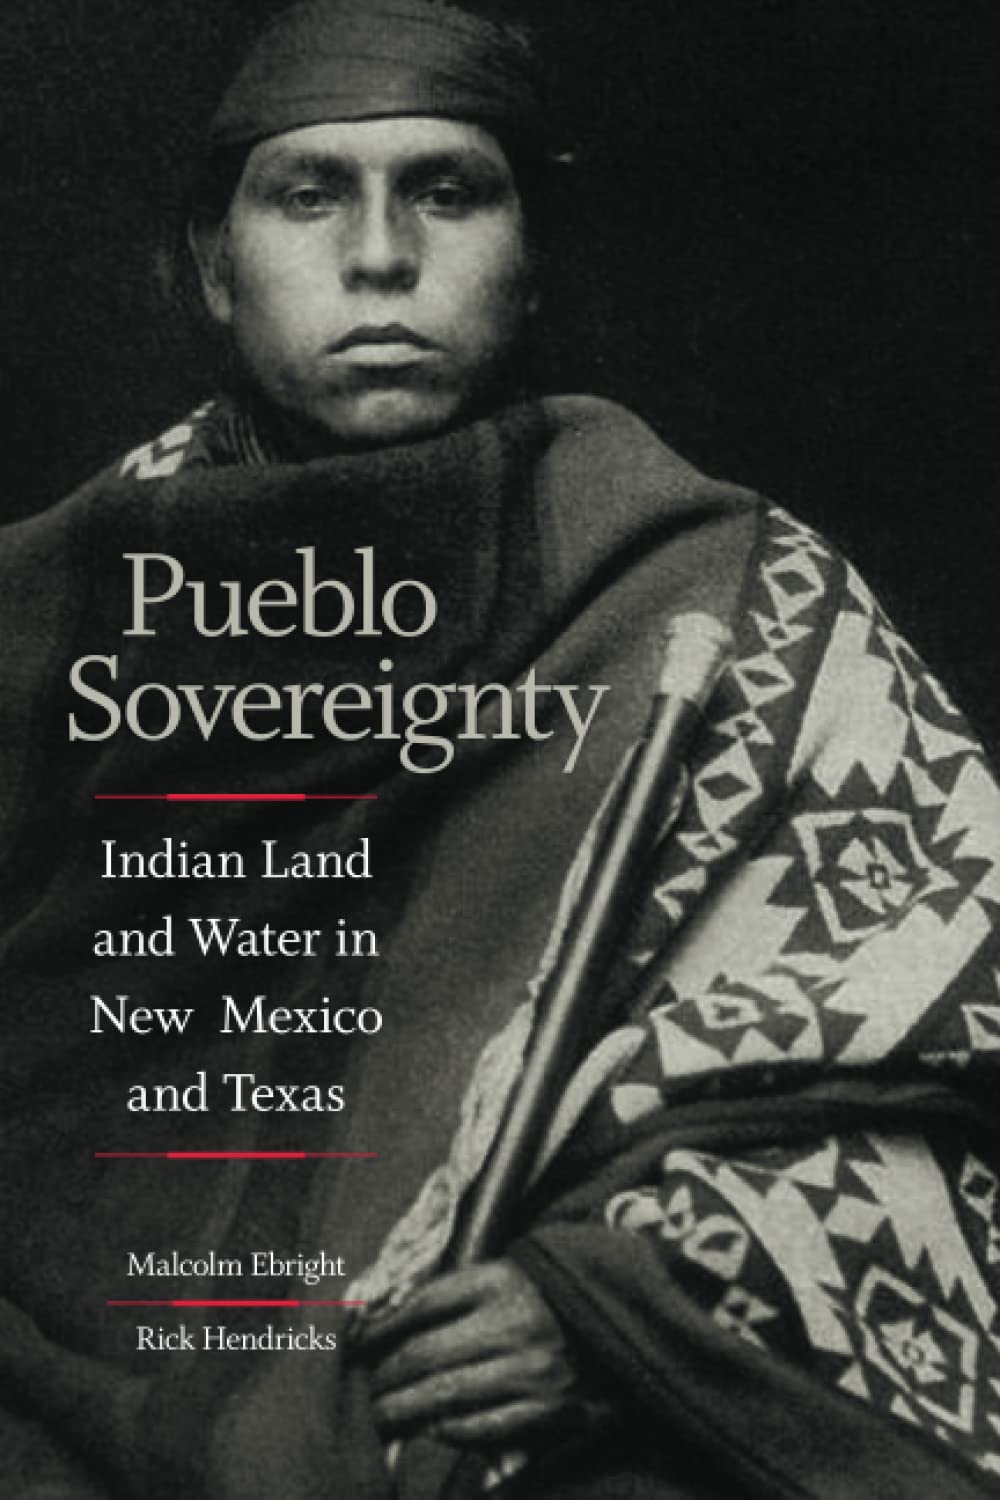 Pueblo Sovereignty: Indian Land and Water in New Mexico and Texas by Malcolm Ebright & Rick Hendricks